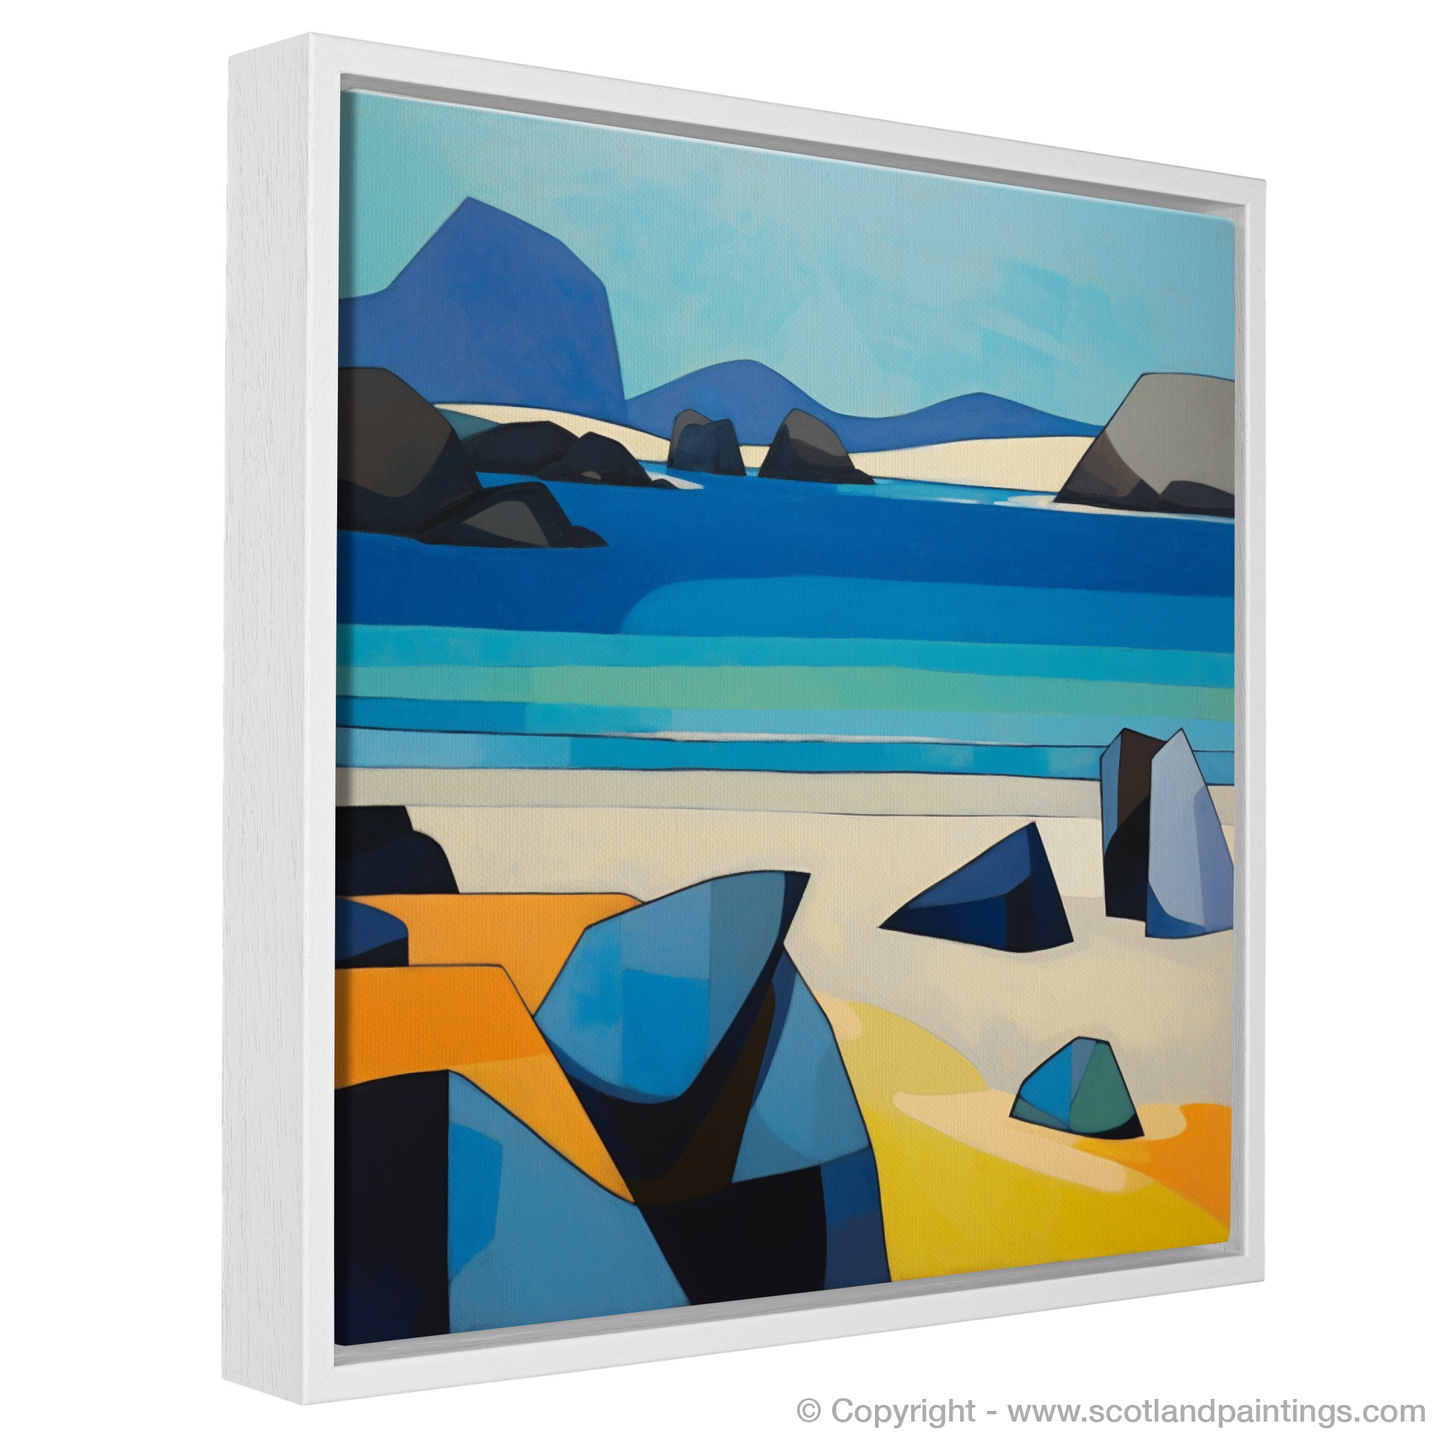 Painting and Art Print of Mellon Udrigle Beach, Wester Ross entitled "Abstract Ode to Mellon Udrigle Beach".